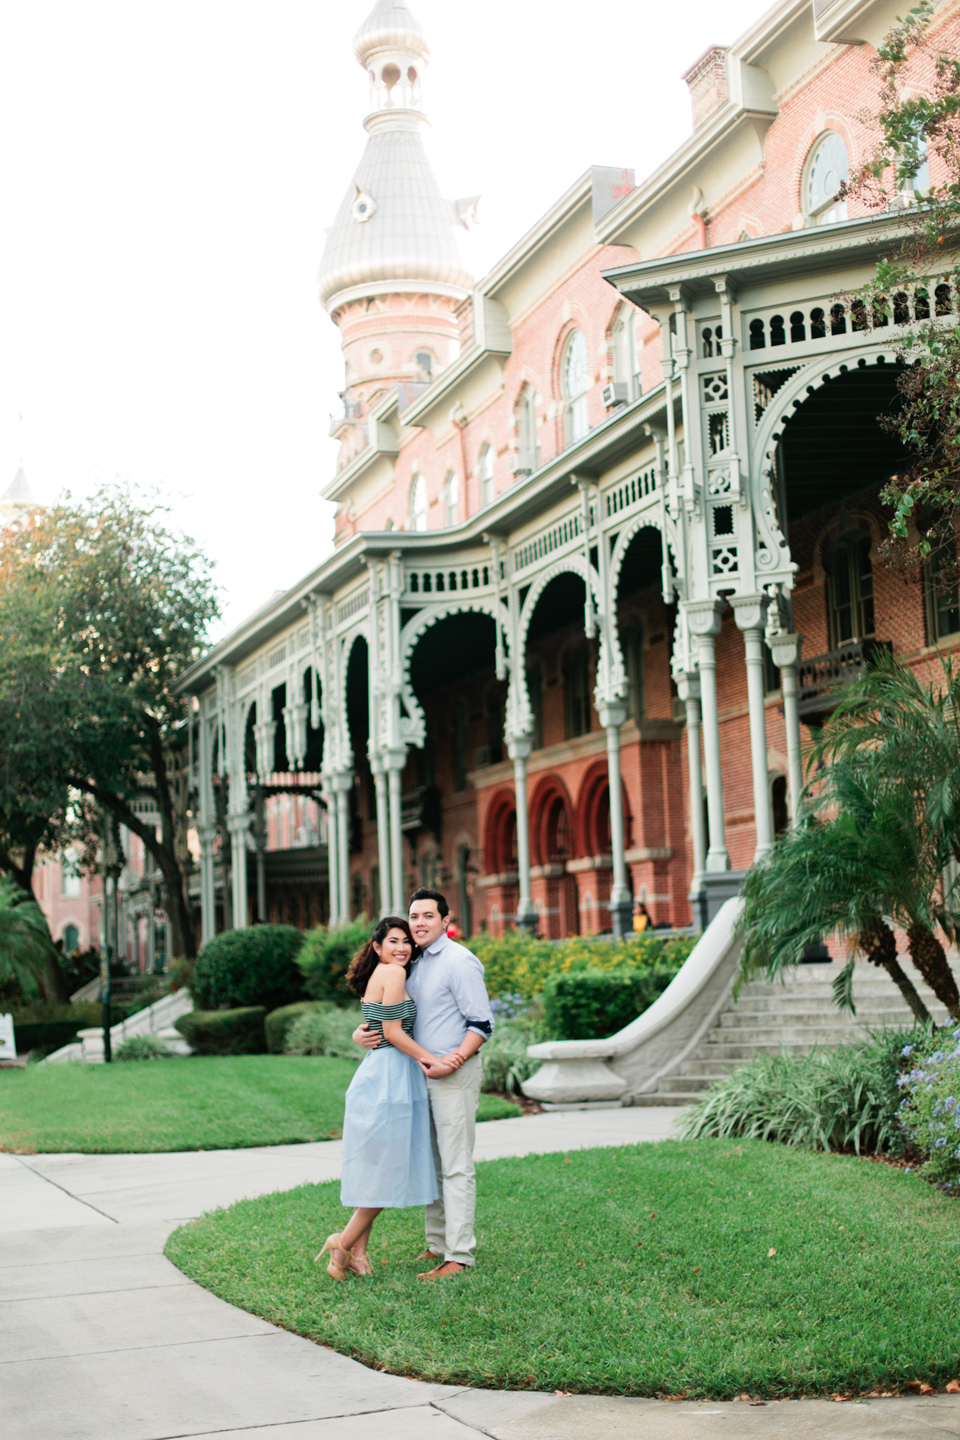 Image of an engaged couple embracing in front of the Henry B. Plant museum in Tampa, Florida.